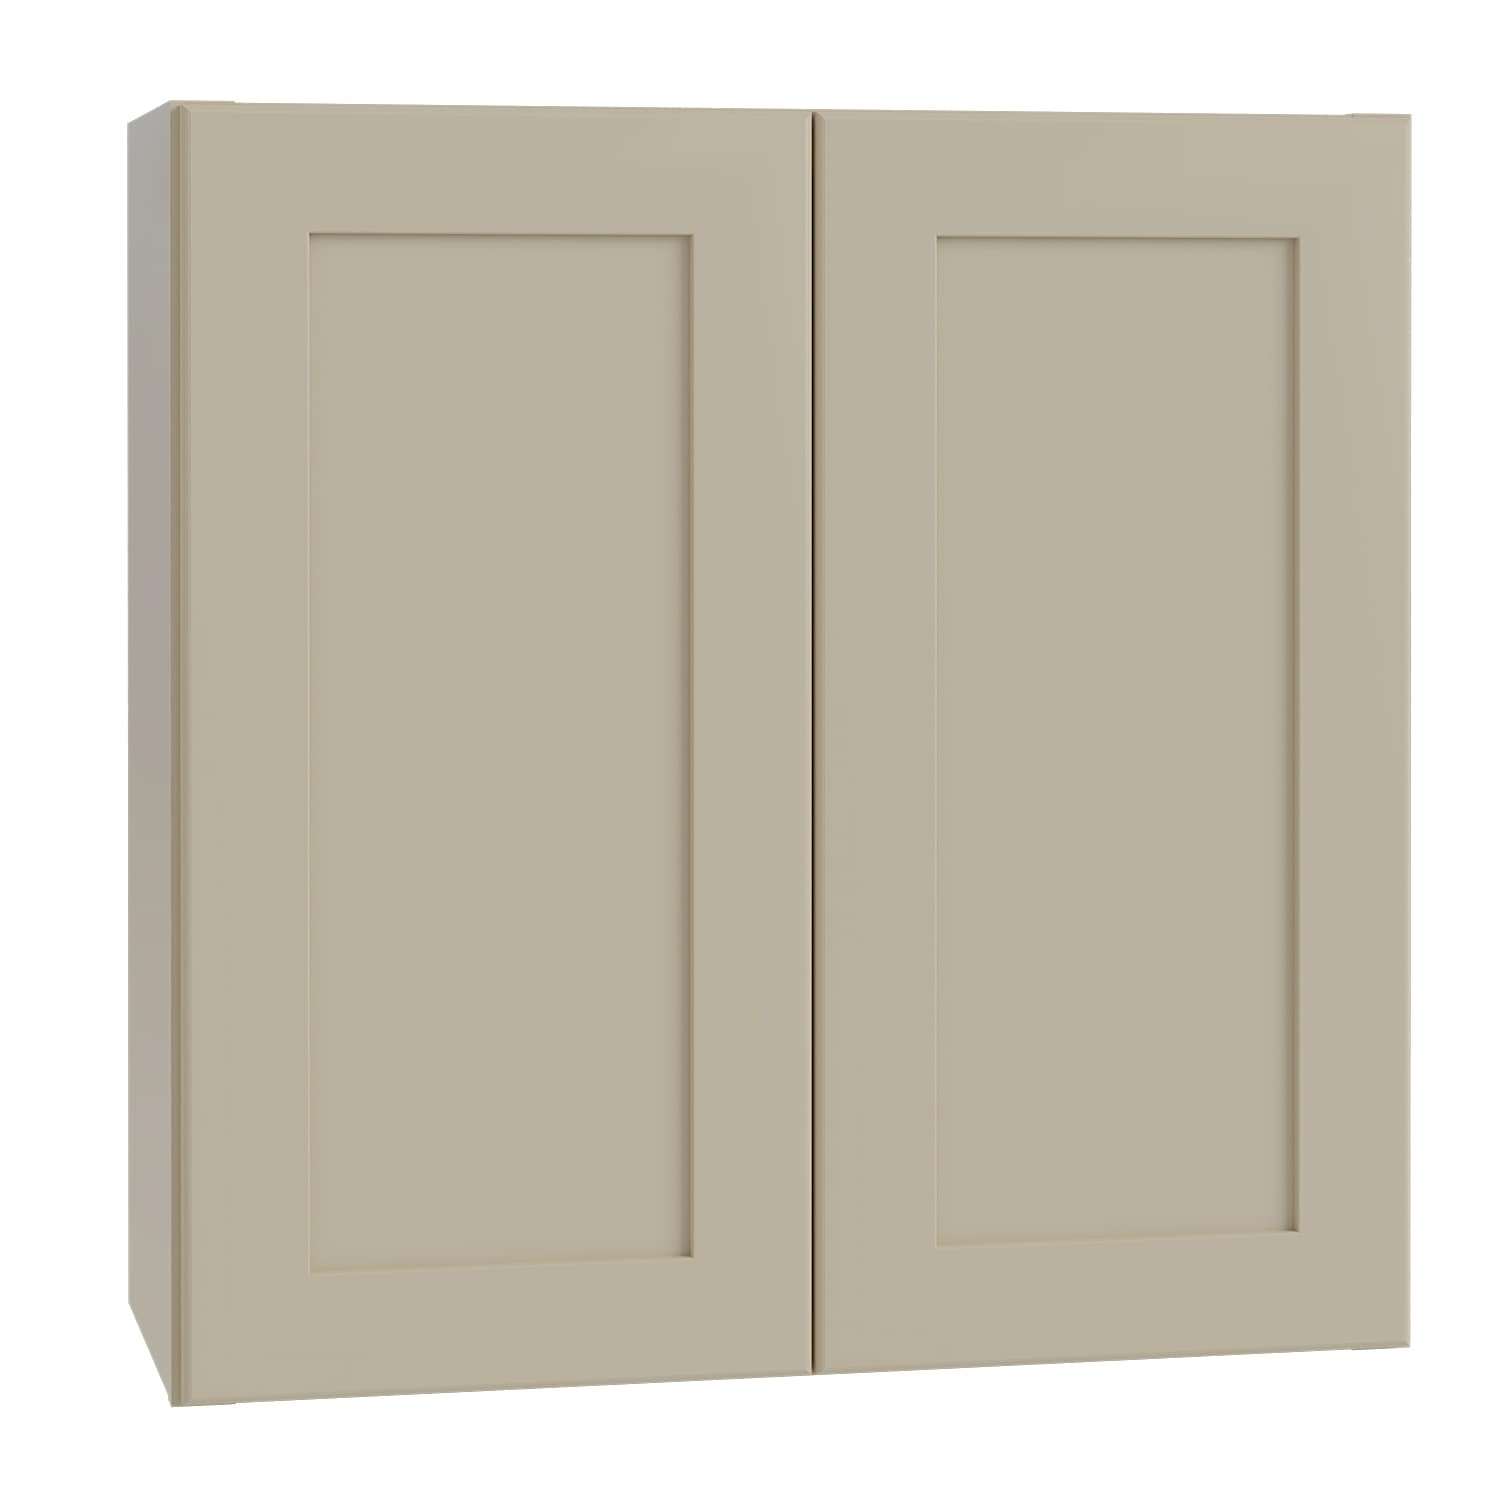 Luxxe Cabinetry 36-in W x 30-in H x 12-in D Norfolk Blended Cream Painted Door Wall Fully Assembled Semi-custom Cabinet in Off-White | W3630-NBC